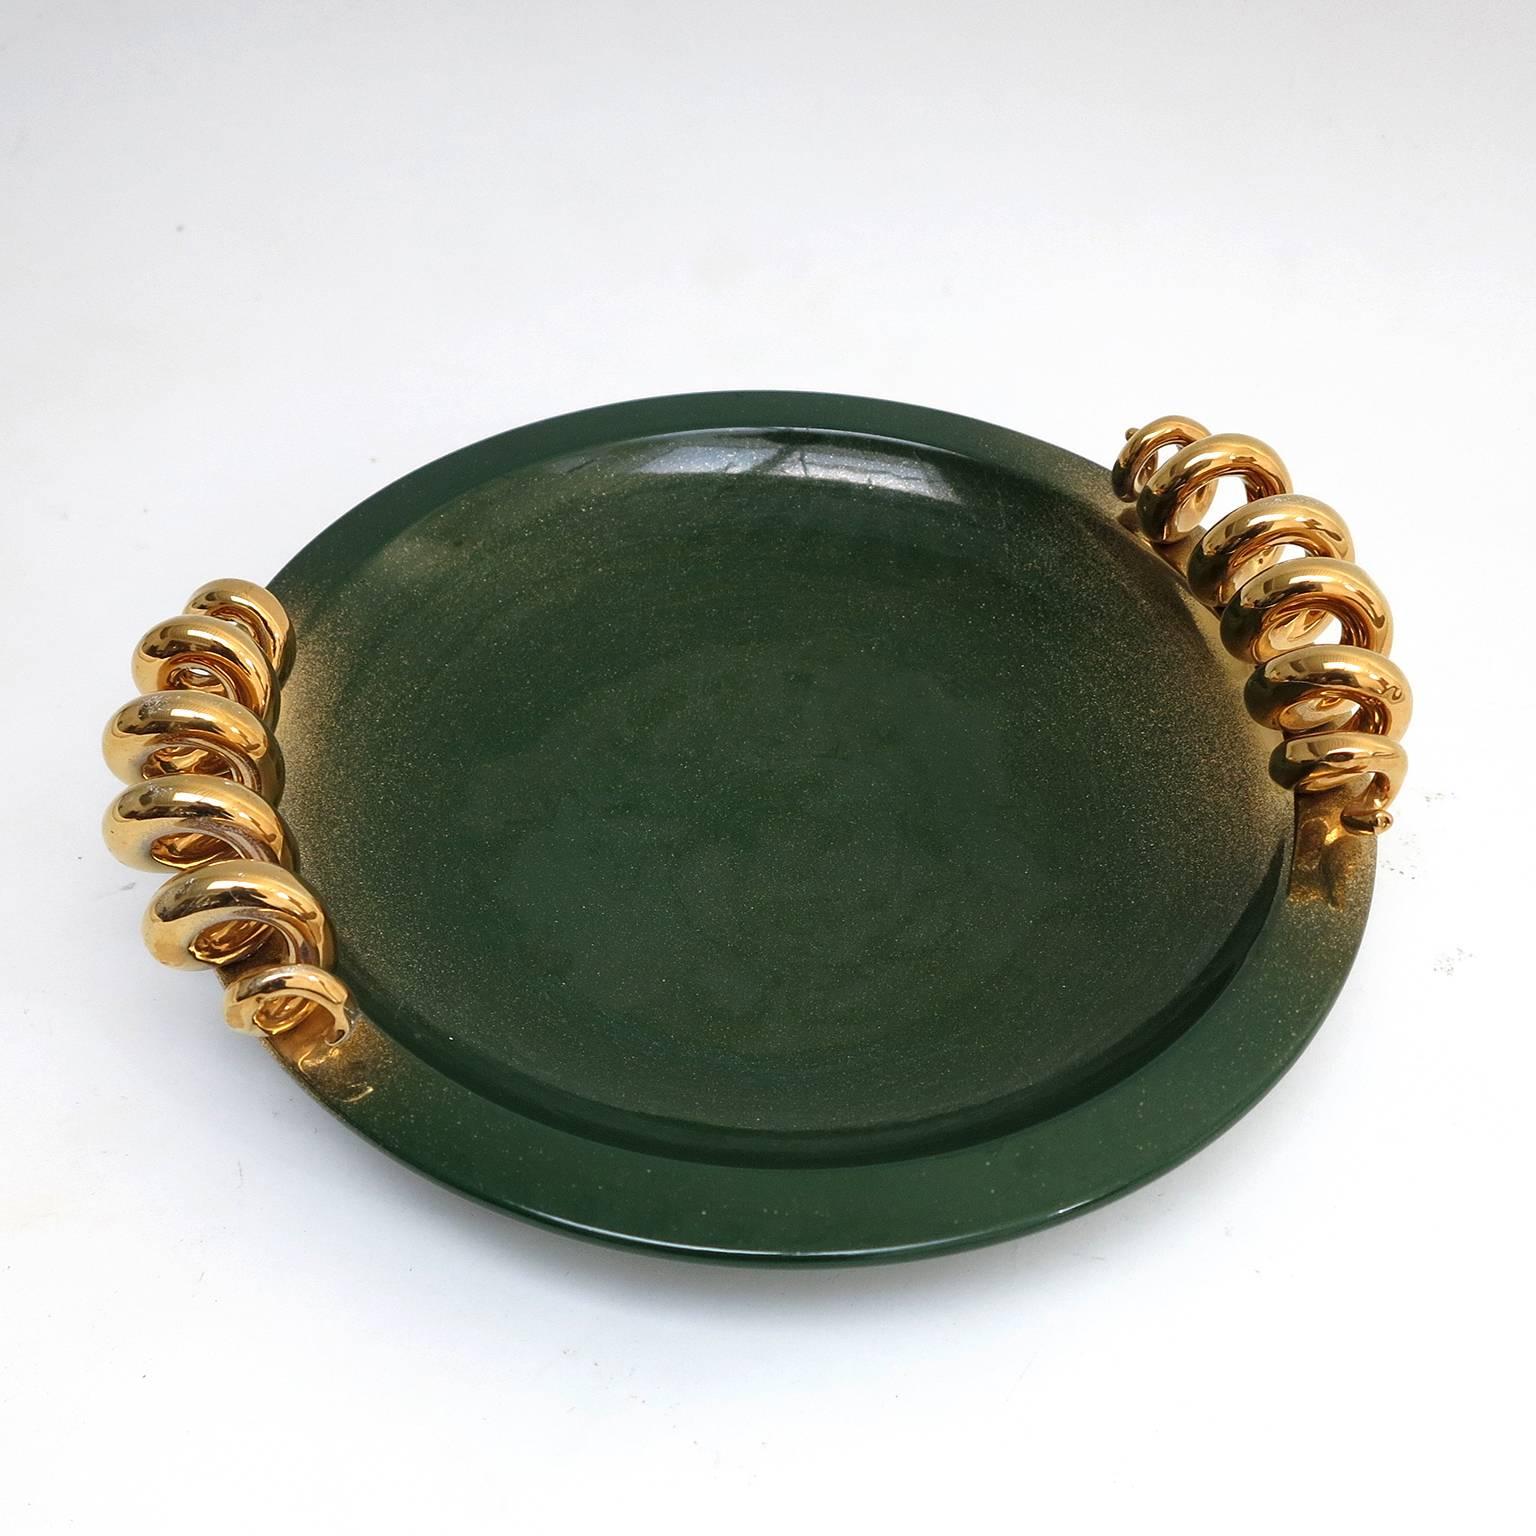 Spectacular salad plate made in green porcelain with two gold dust porcelain handles. It has a matching sauceboat.